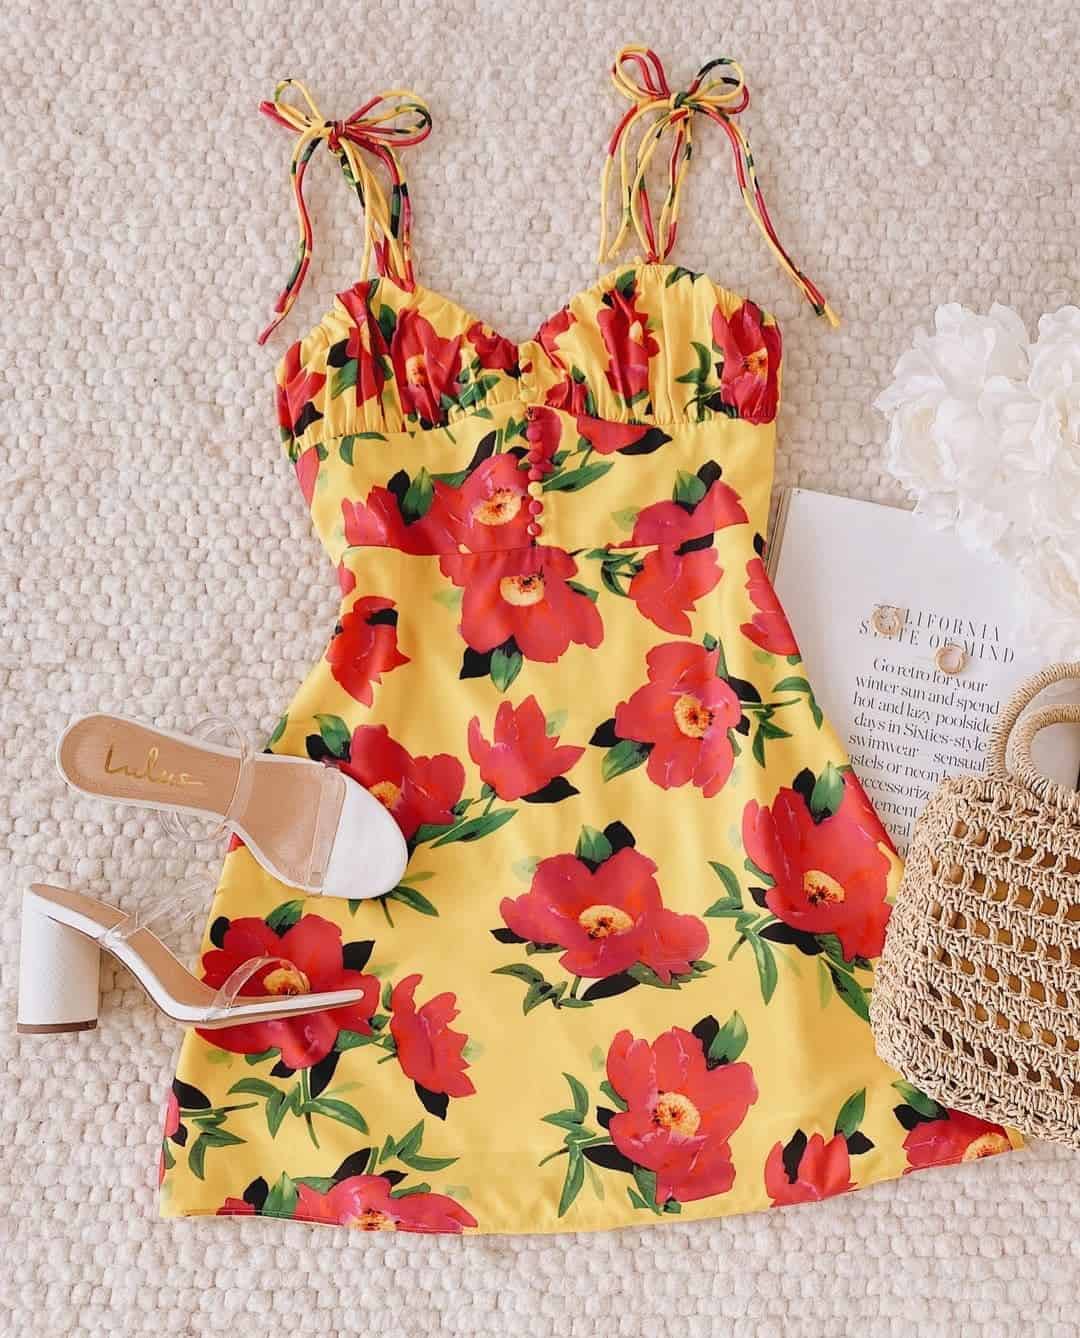 Summer Outfits Sundresses Beach Casual Dionne Bright Yellow Floral Print Satin Tie-Strap Mini Dress